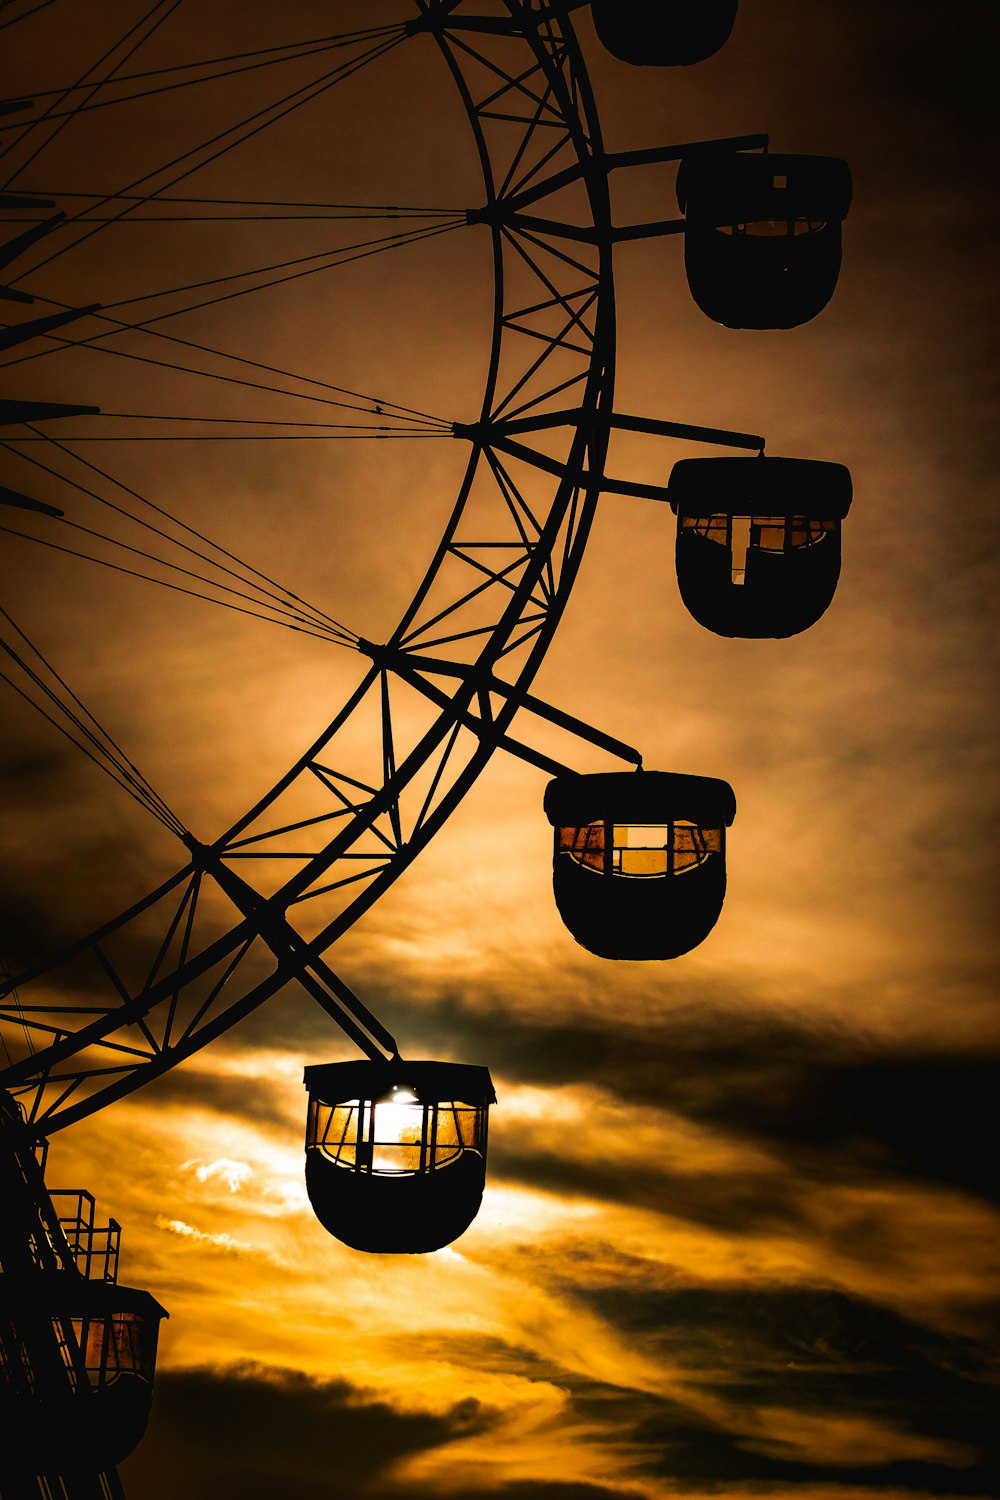 a ferris wheel is silhouetted against a cloudy sky